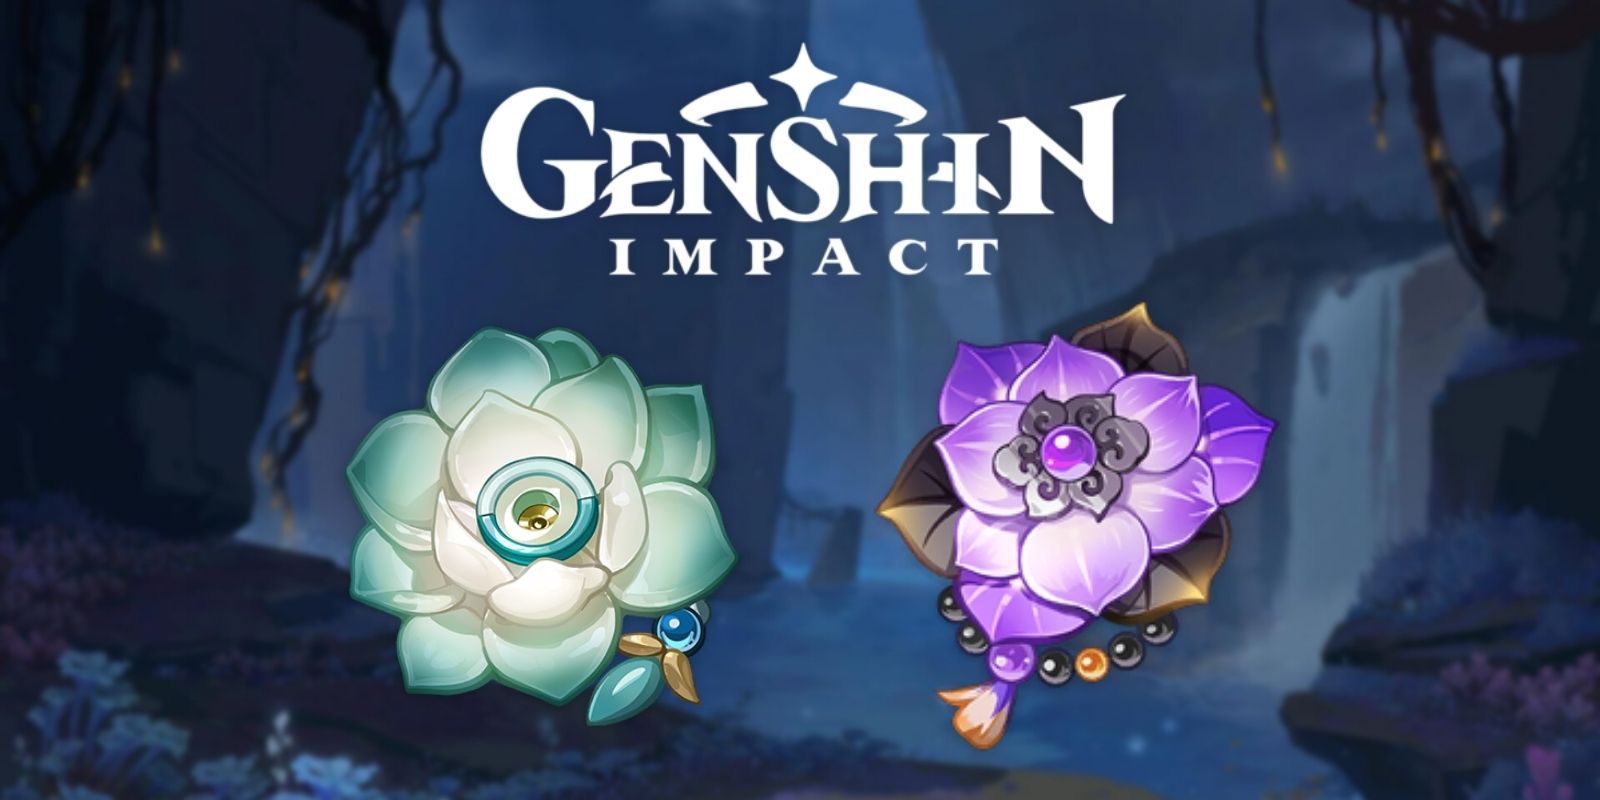 Genshin Impact Echoes of an Offering Vermillion Hereafter